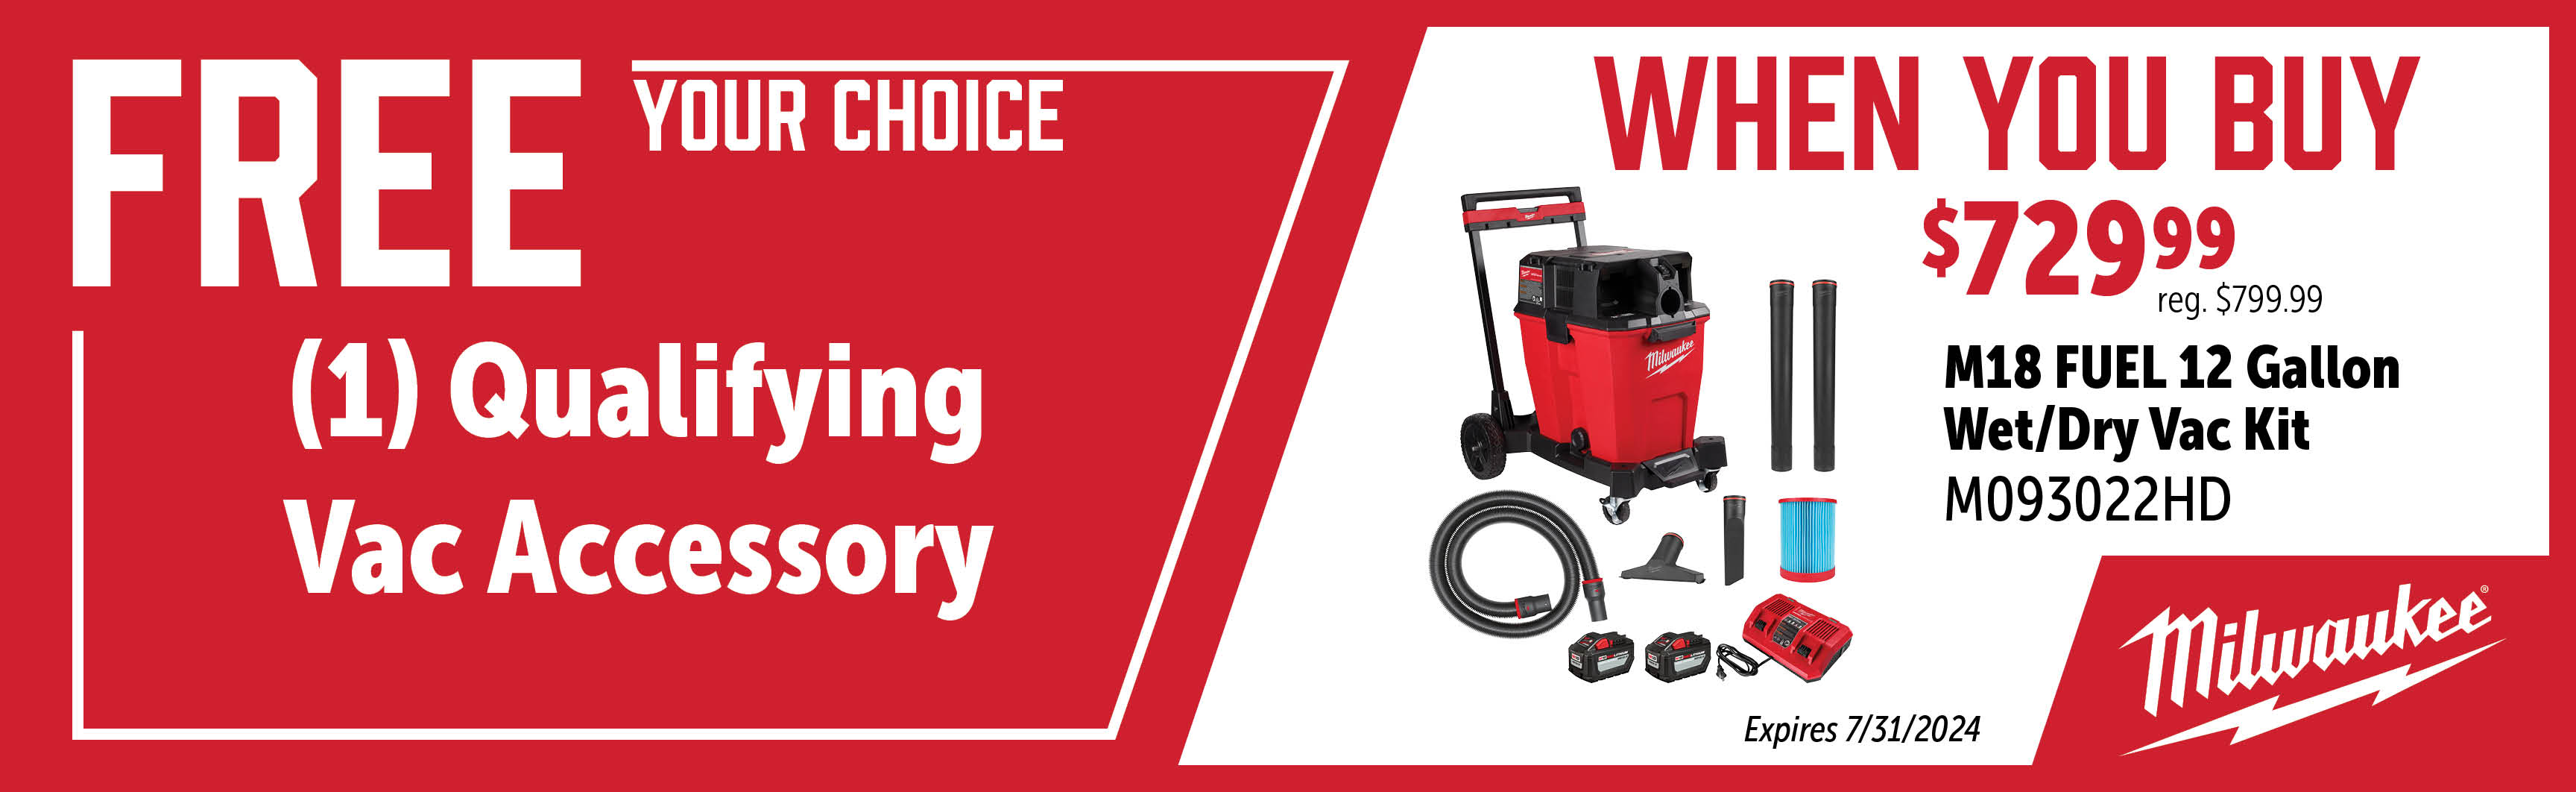 Milwaukee May - July: Buy a M093022HD and Get a Qualifying Vac Accessory Free